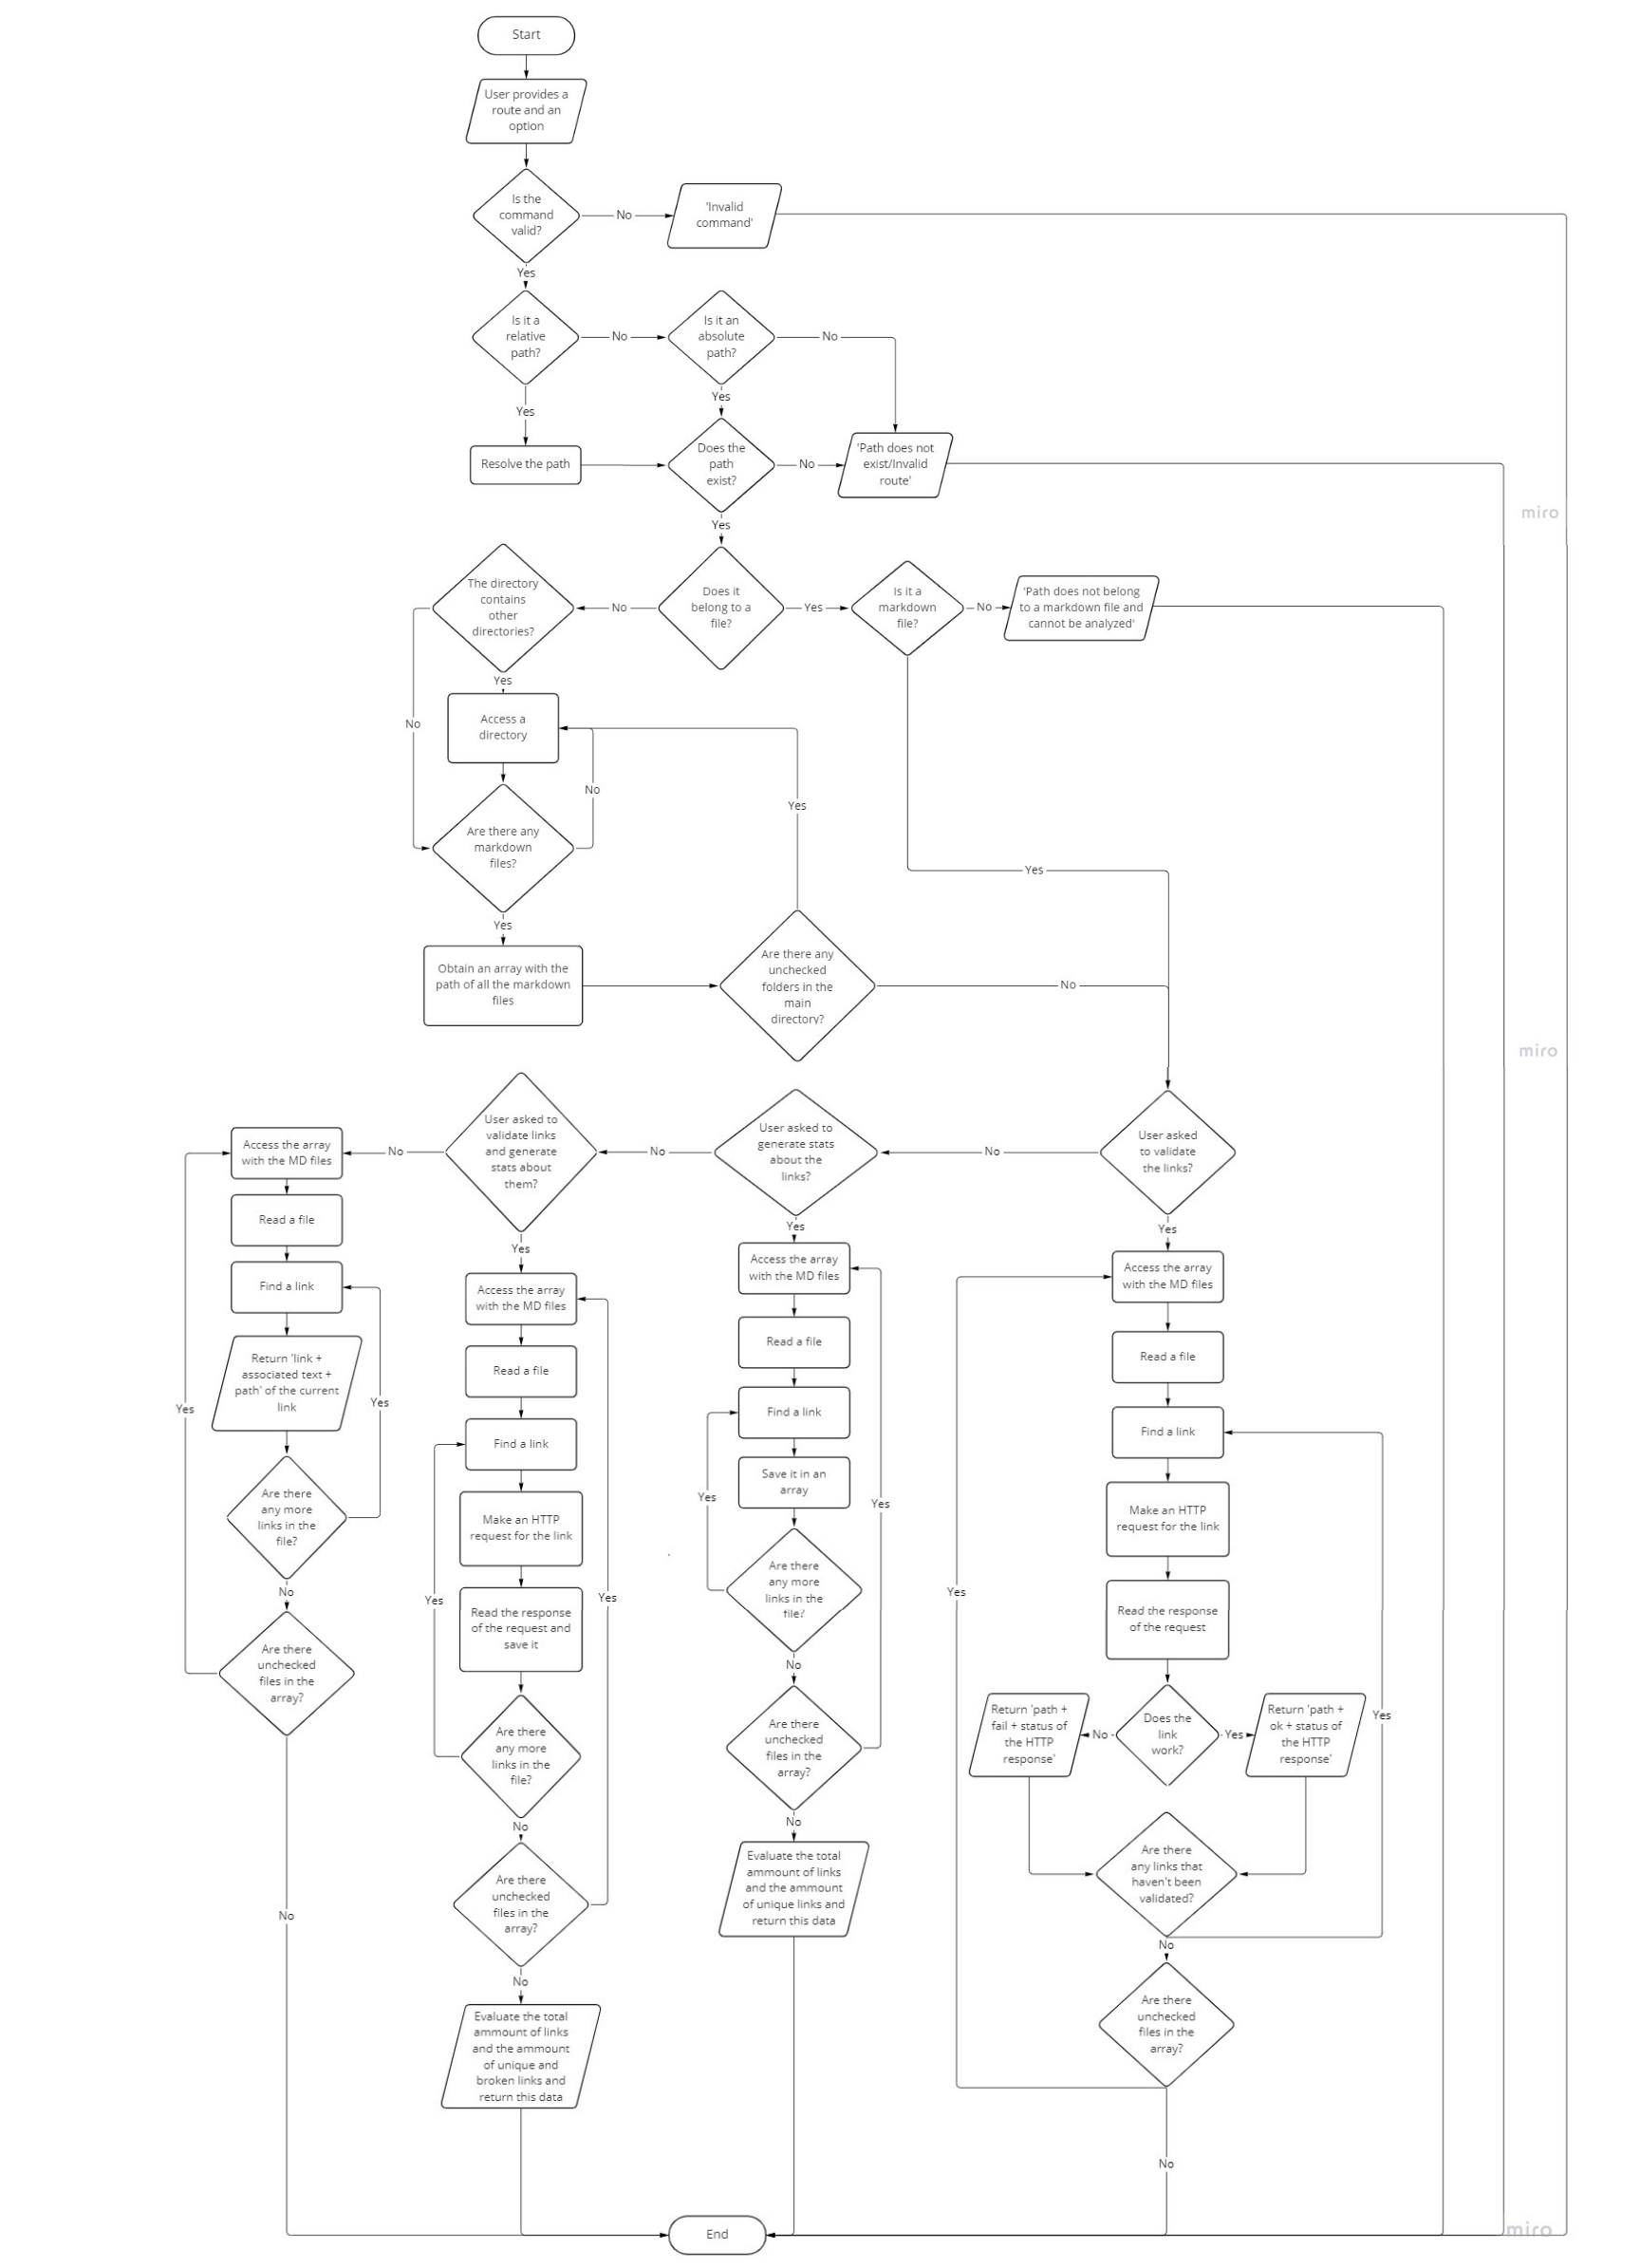 Flowchart for the application